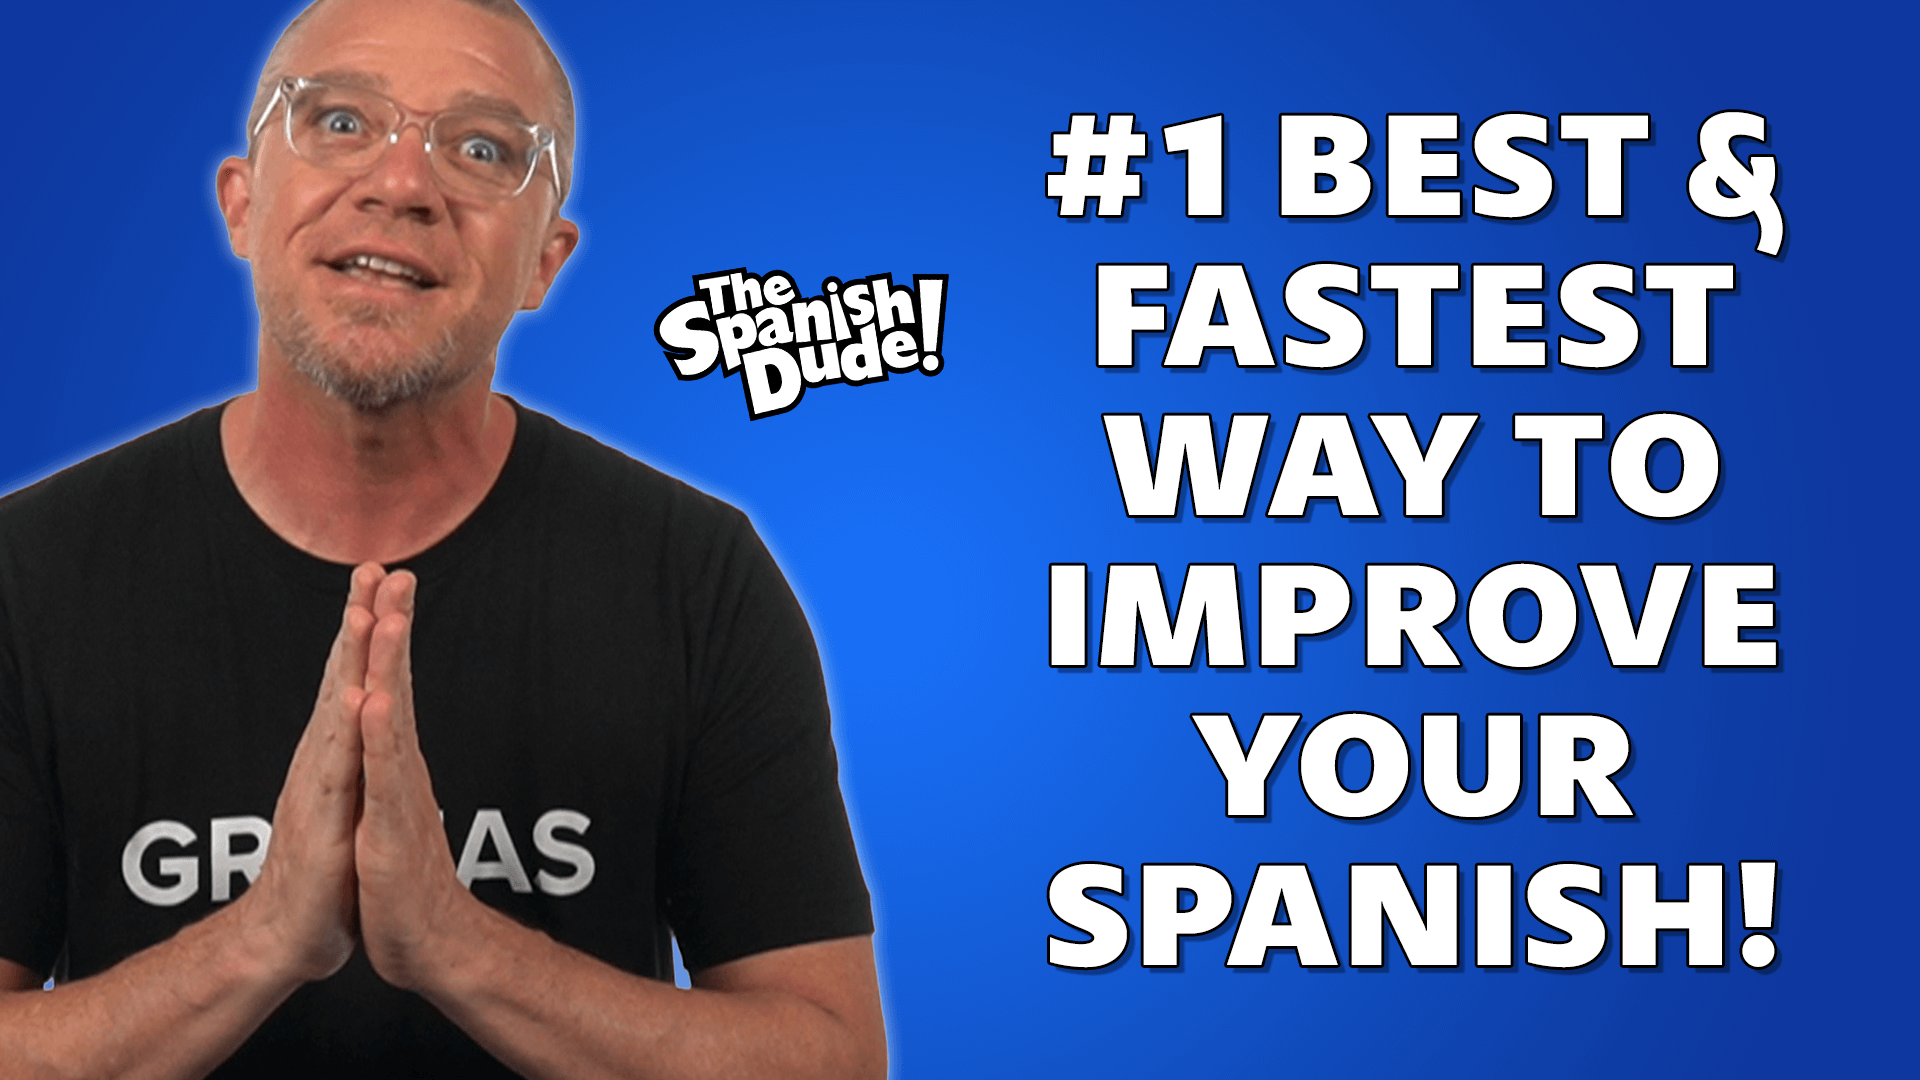 #1 Best & Fastest Way to Improve Your Spanish!